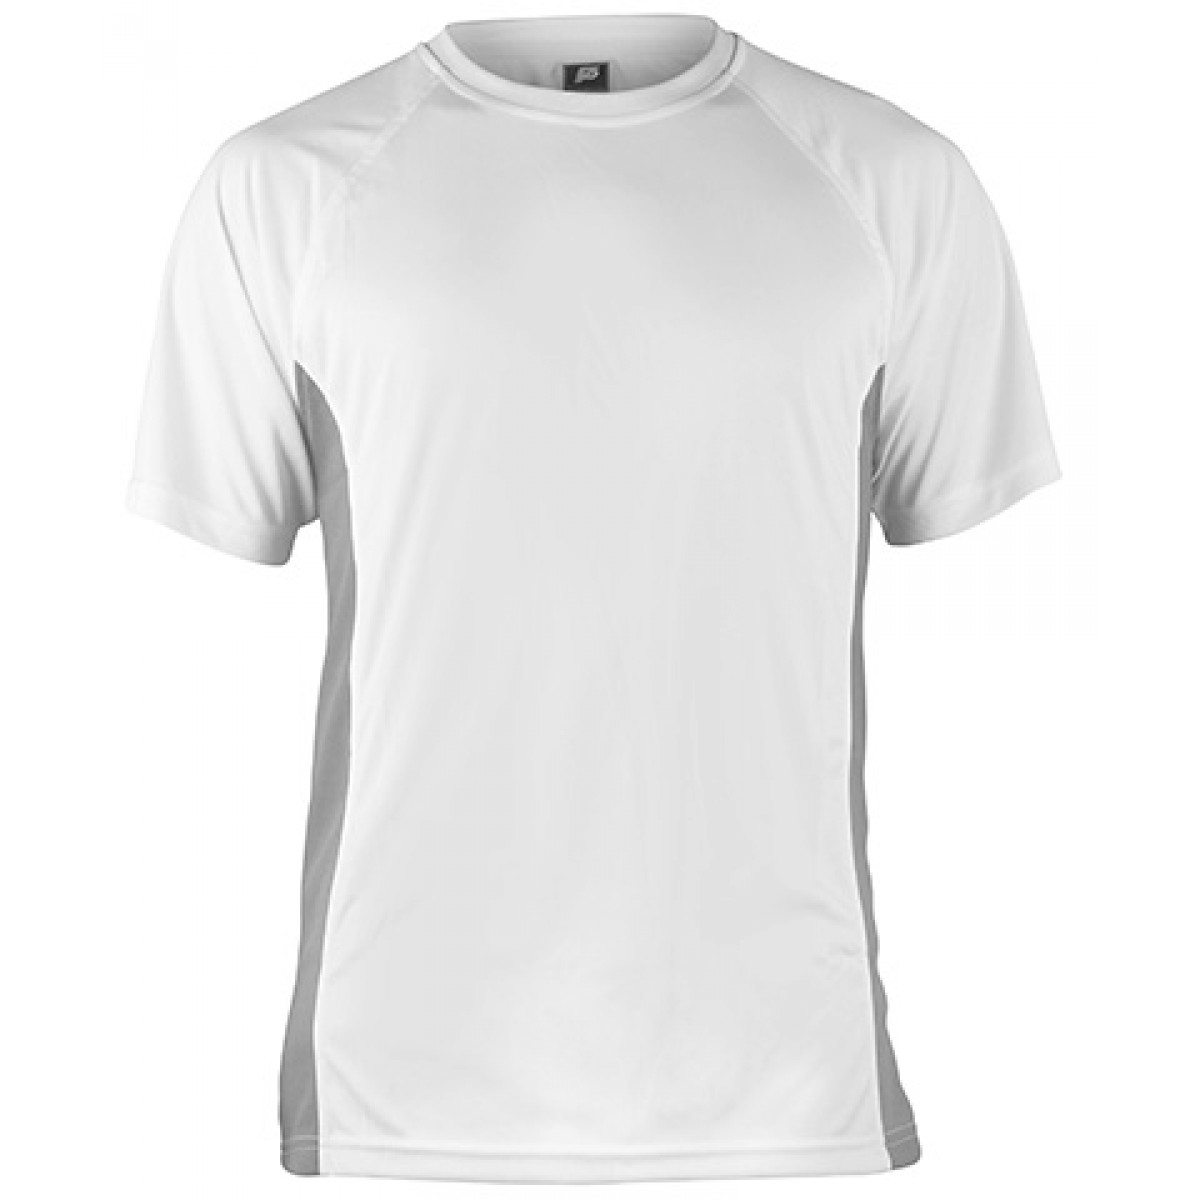 Short Sleeve White Performance With Gray Side Insert